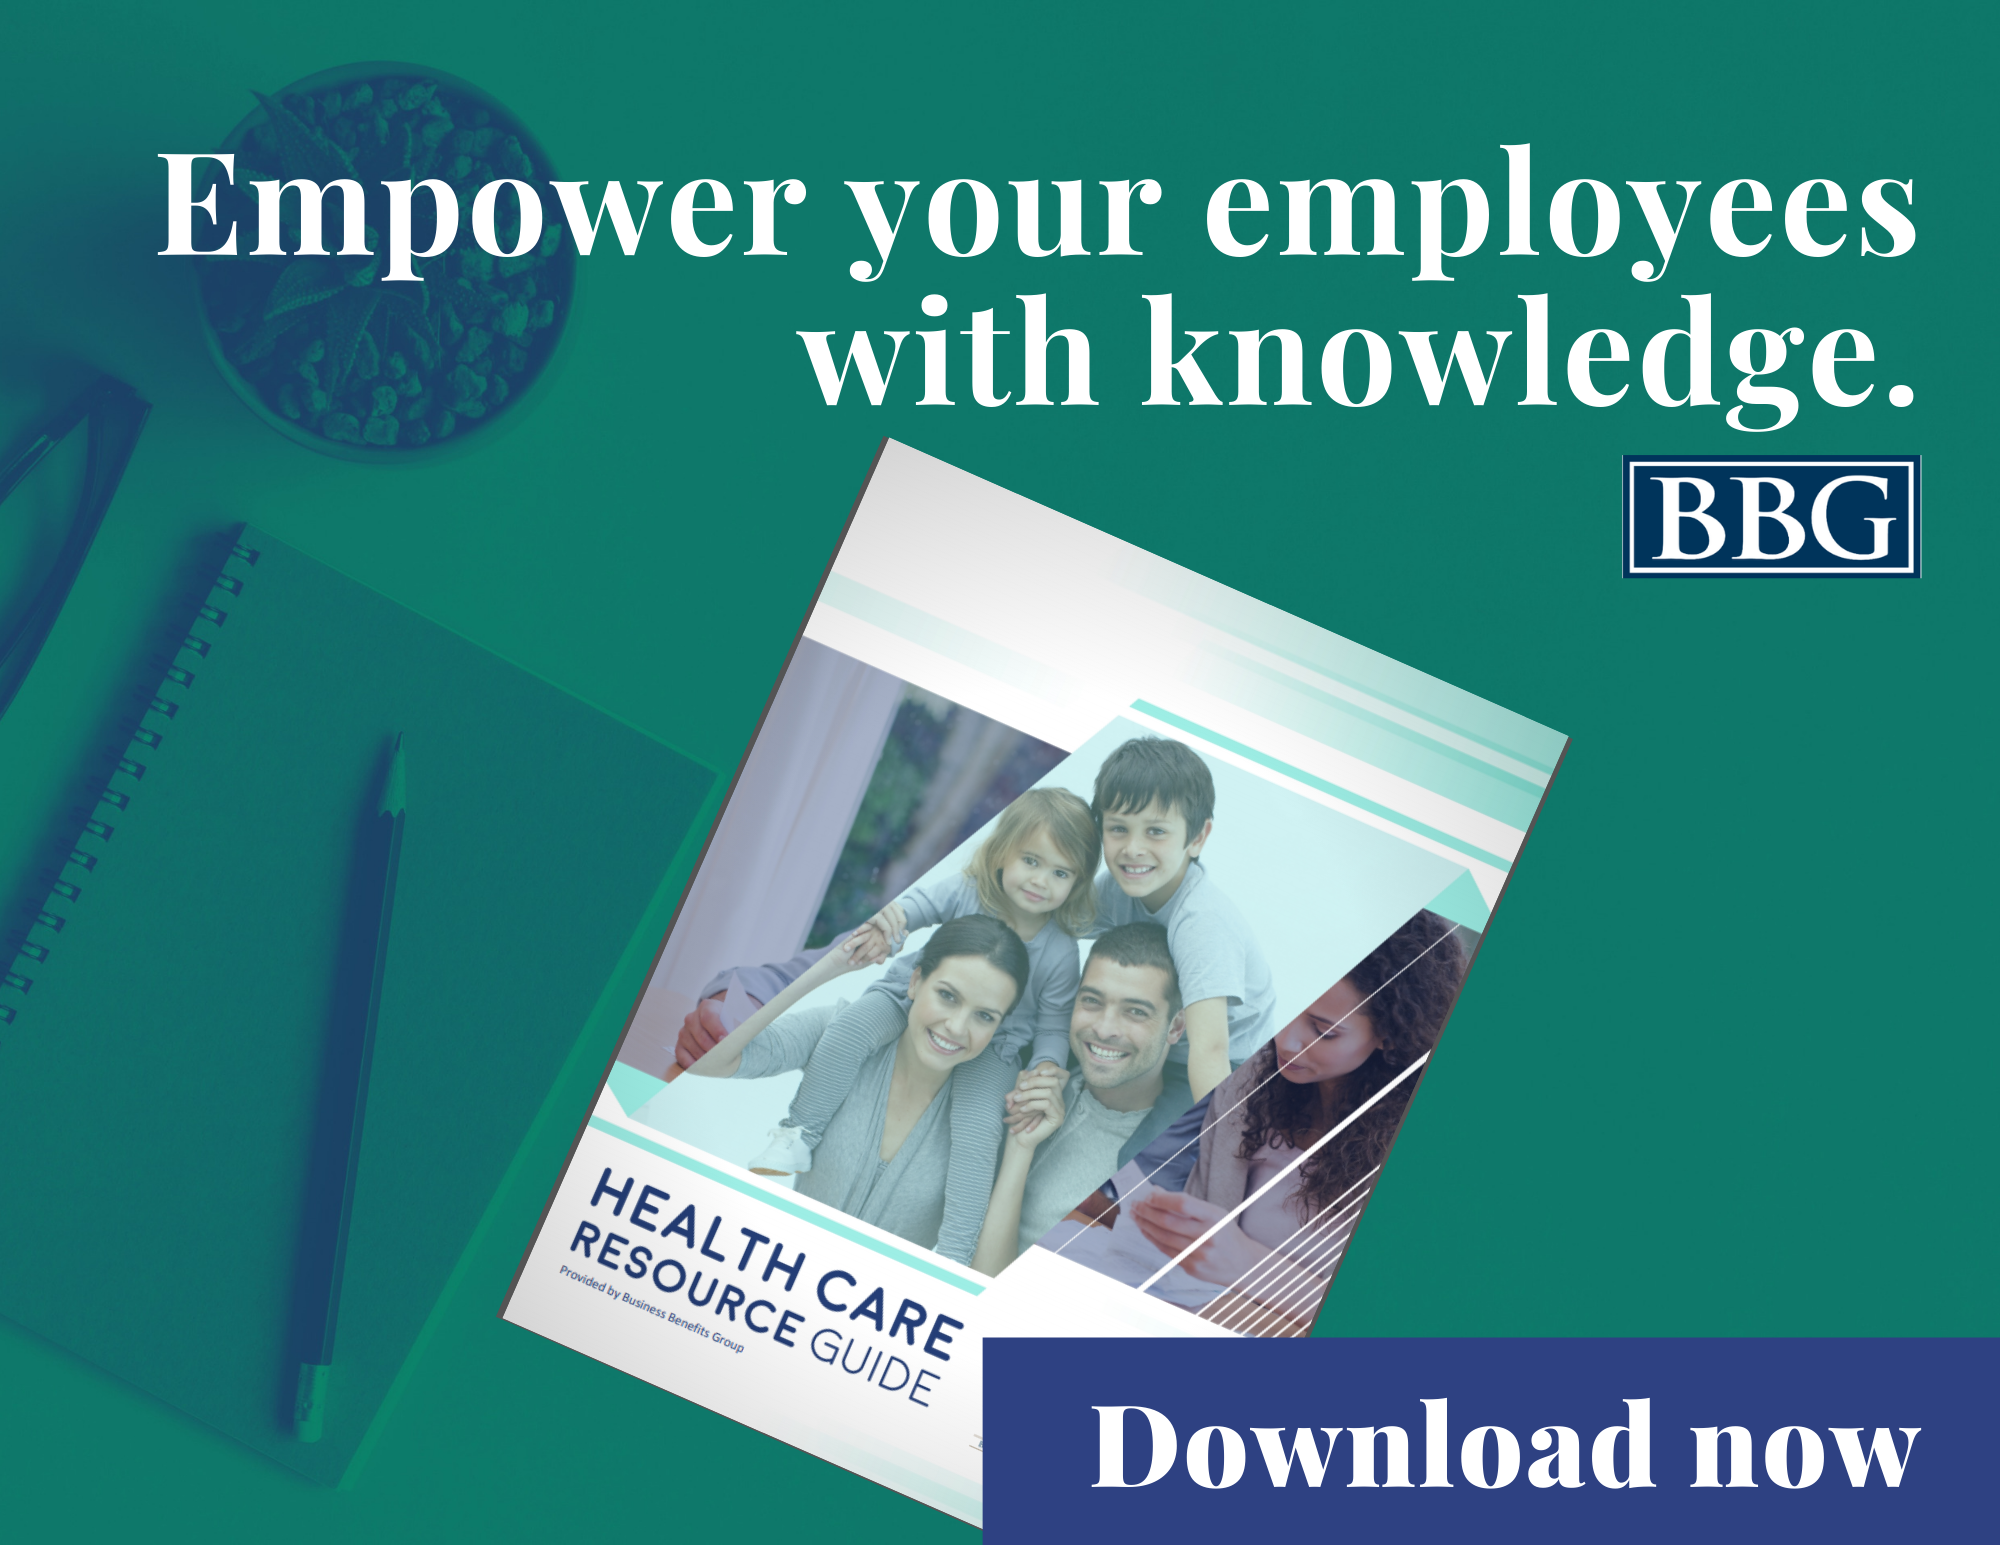 Empower your employees with knowledge